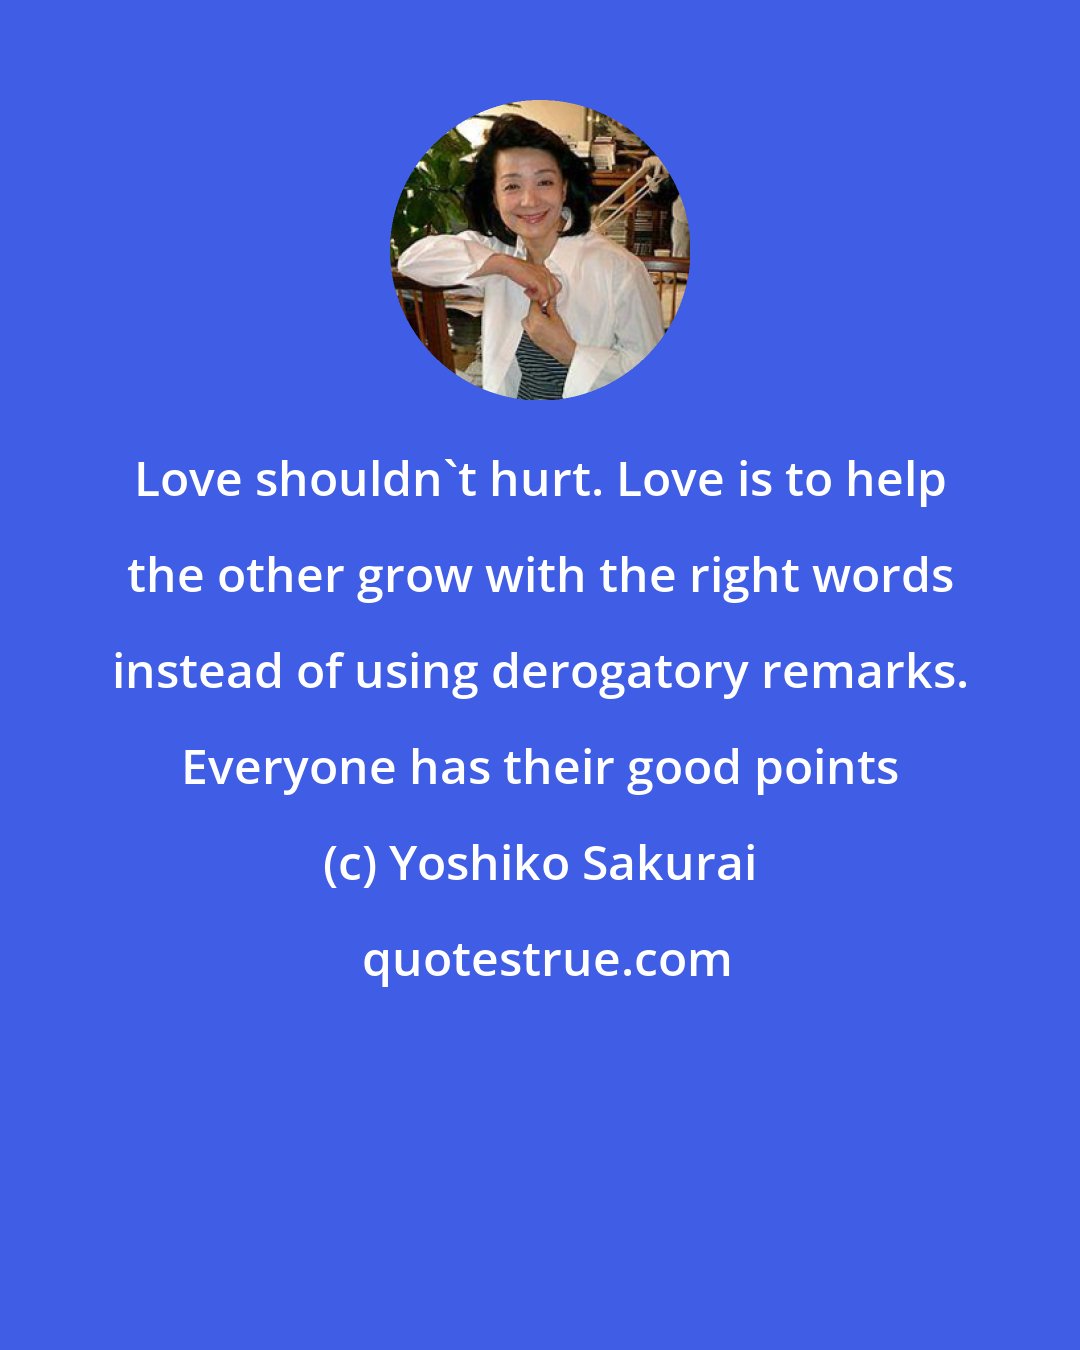 Yoshiko Sakurai: Love shouldn't hurt. Love is to help the other grow with the right words instead of using derogatory remarks. Everyone has their good points